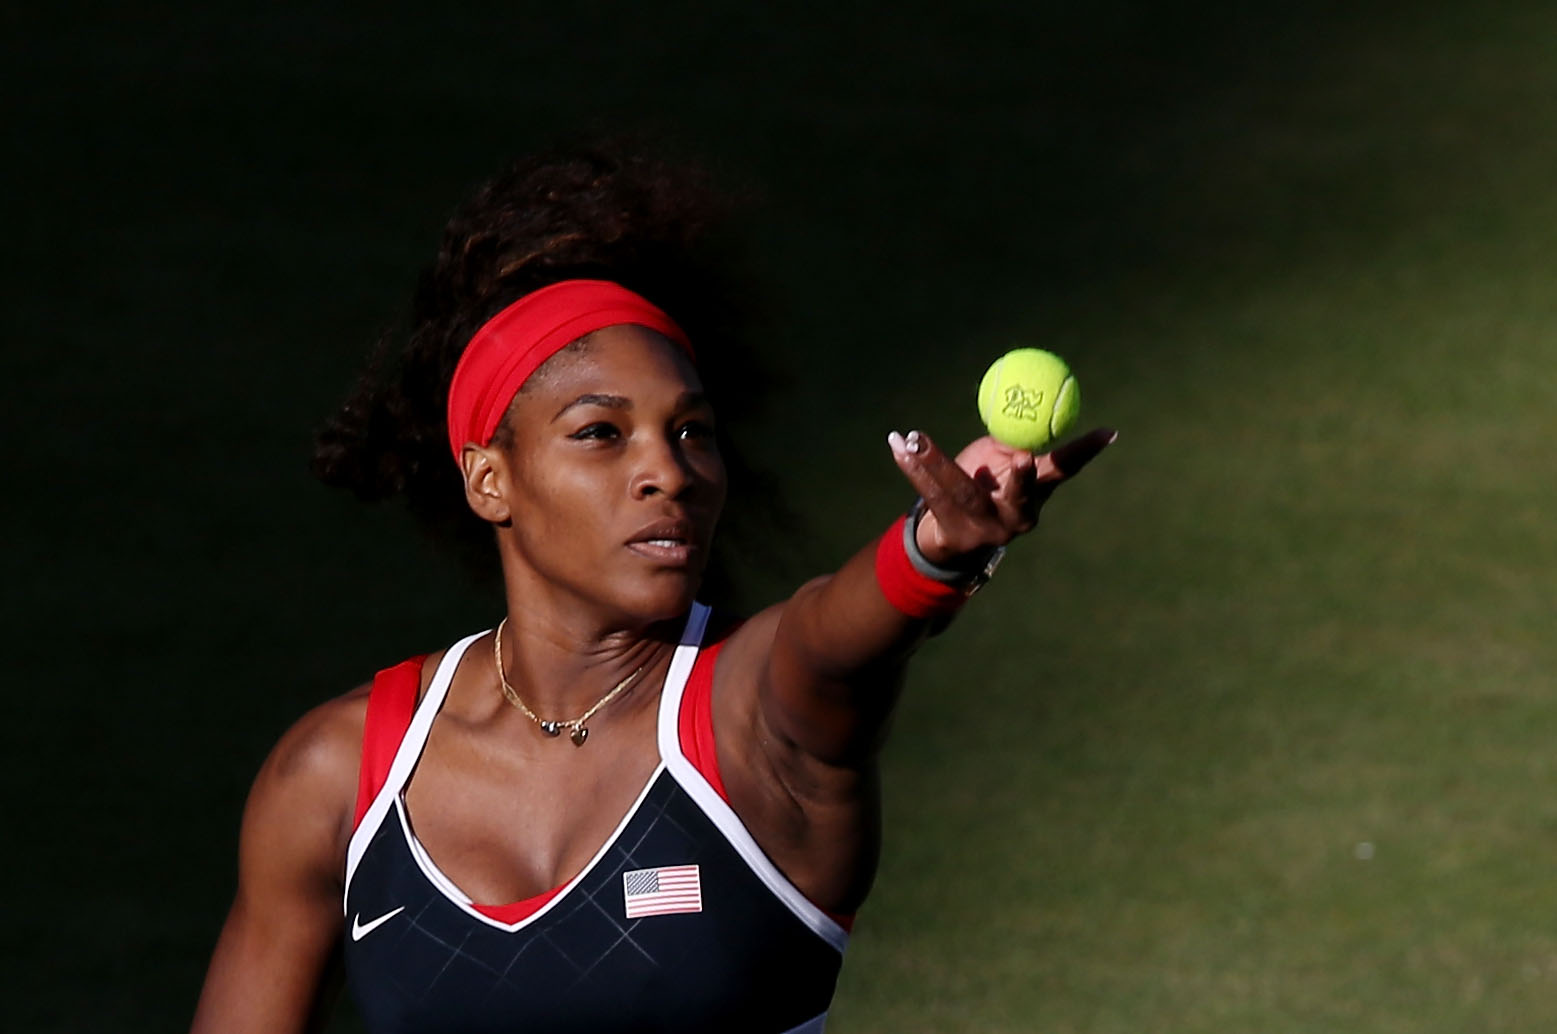 Serena Williams wins Gold for Women’s Singles at the Olympics